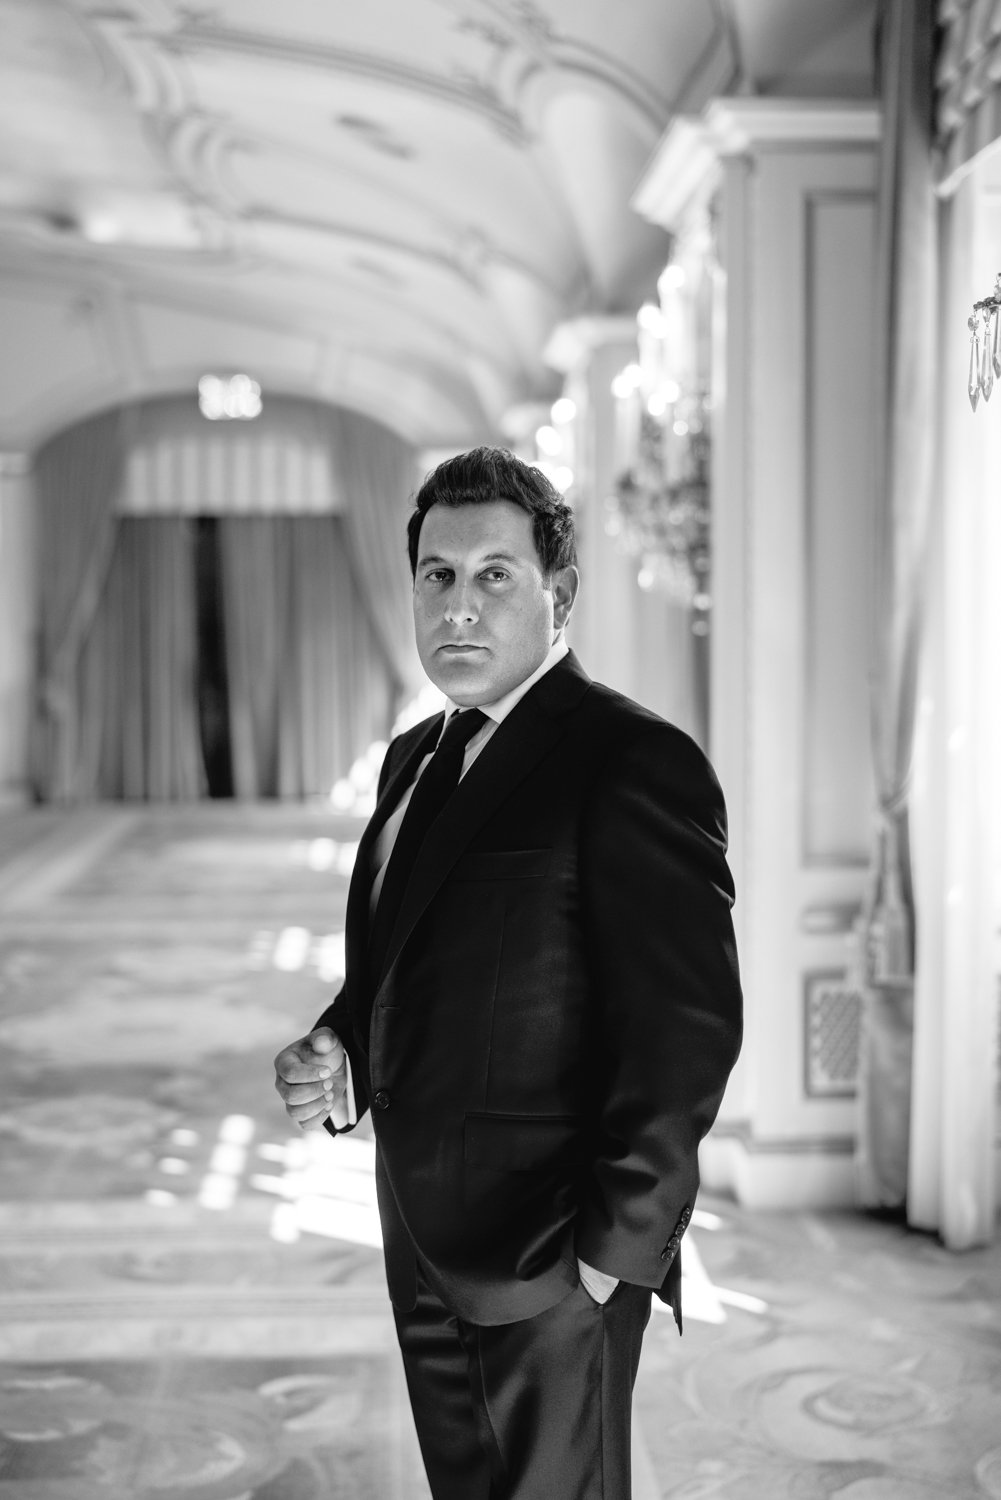 Groom stands in the hallway of the St. Regis in New York City with a hand in his pocket, looking at the camera.

Manhattan Luxury Wedding. New York Luxury Wedding Photographer. Wedding in Manhattan. NYC Luxury Wedding.